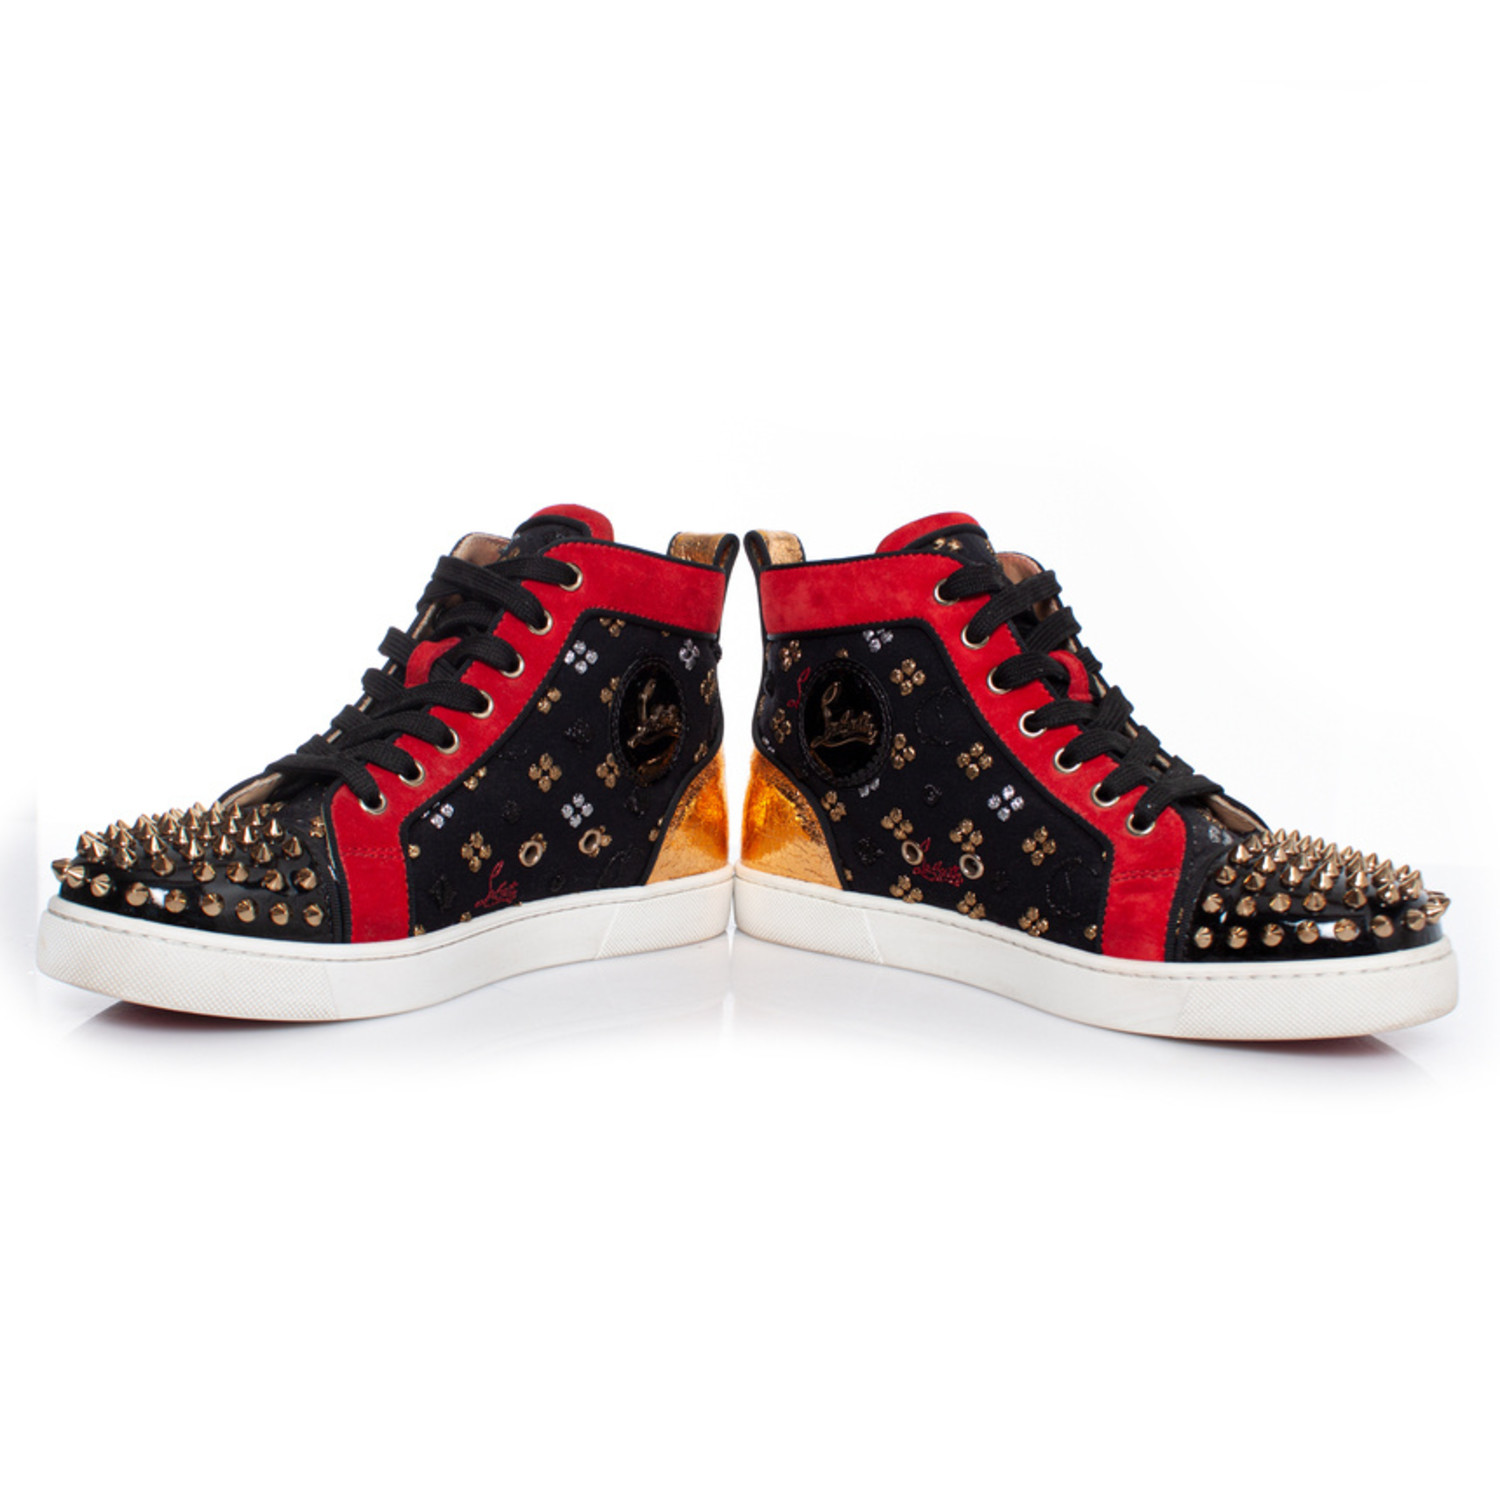 Lou Spikes II Leather Sneakers in White  Christian Louboutin  Mytheresa